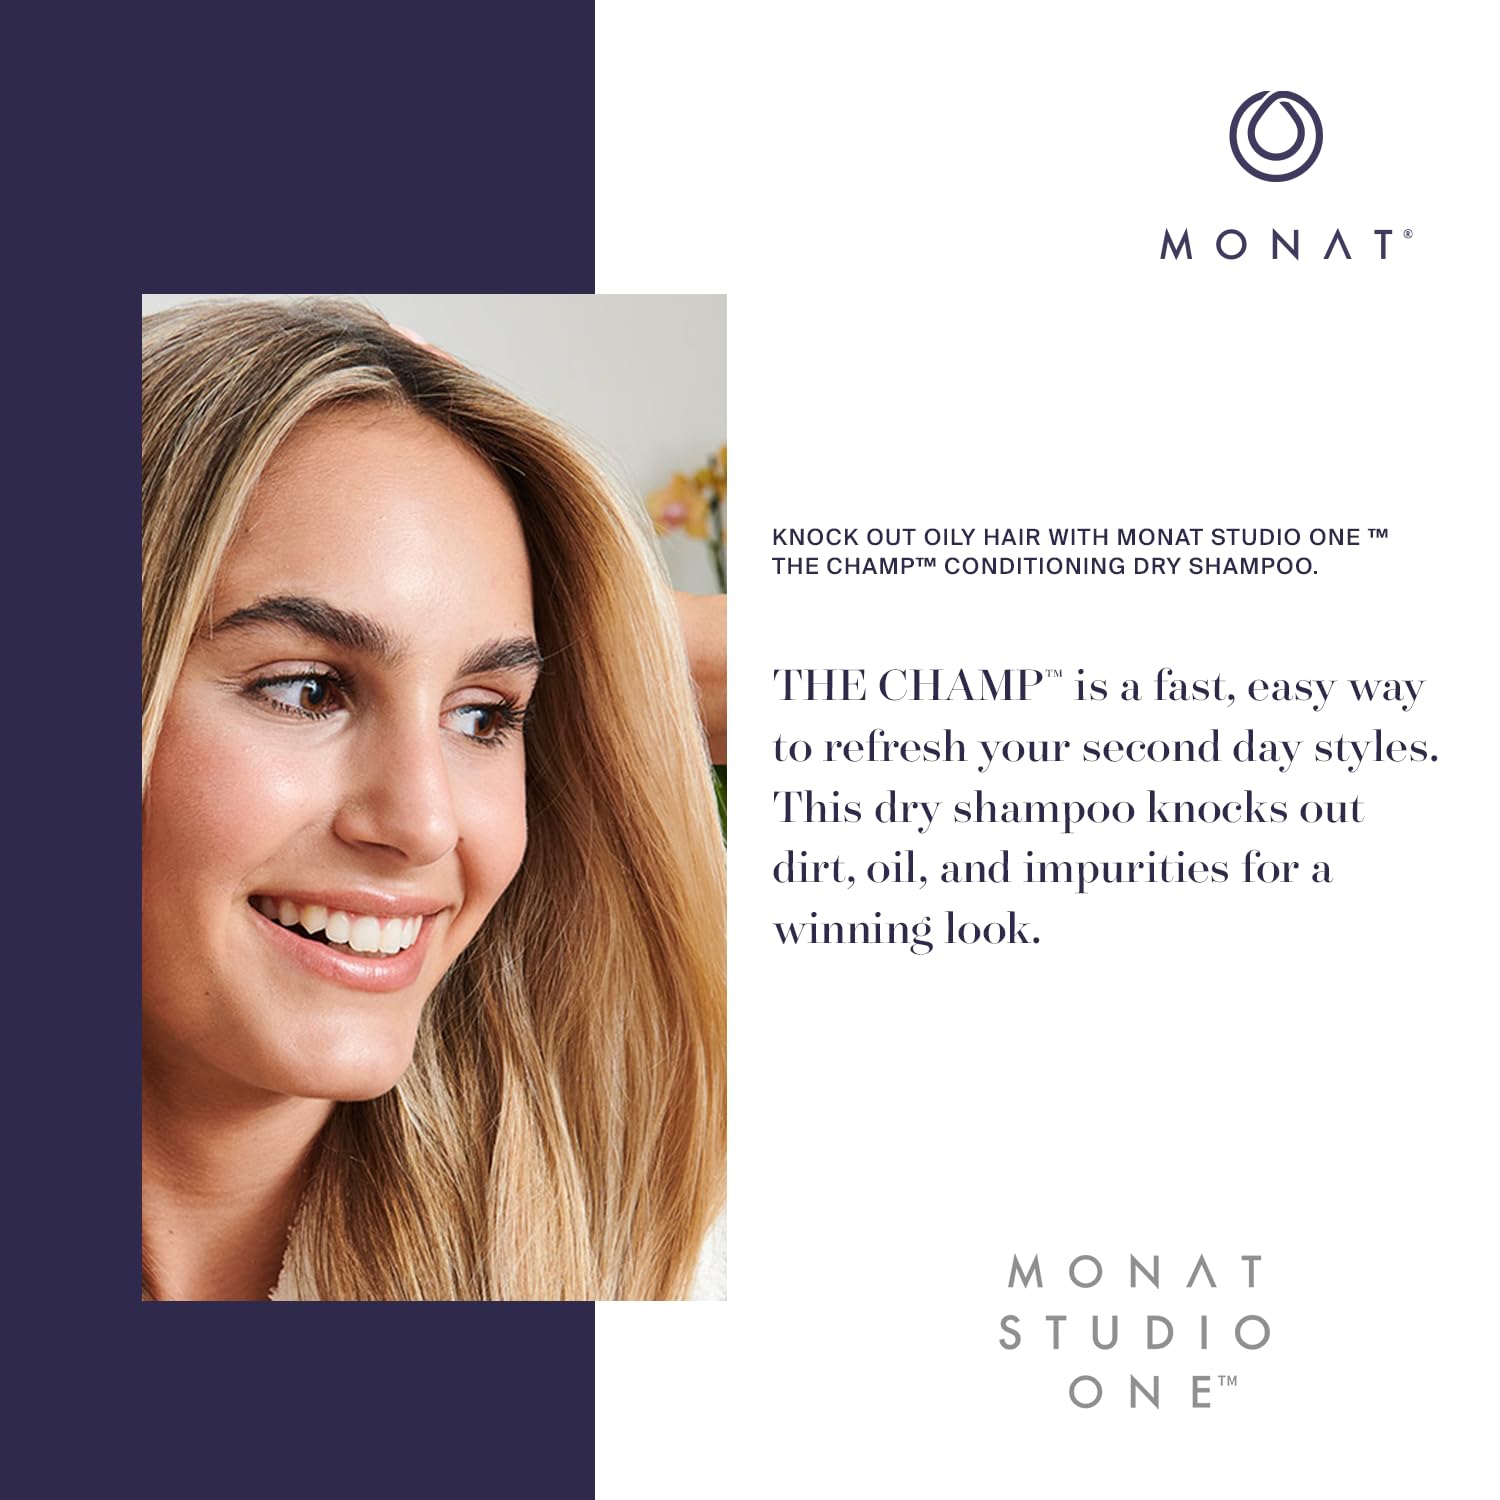 MONAT Studio One™ The Champ™ Conditioning Dry Shampoo Infused w/ Rejuveniqe® - Waterless Shampoo That Absorbs Oils, Dirt & Impurities in Between Shampoos. For All Hair Types - Net wt. 113g/4 oz. : Beauty & Personal Care